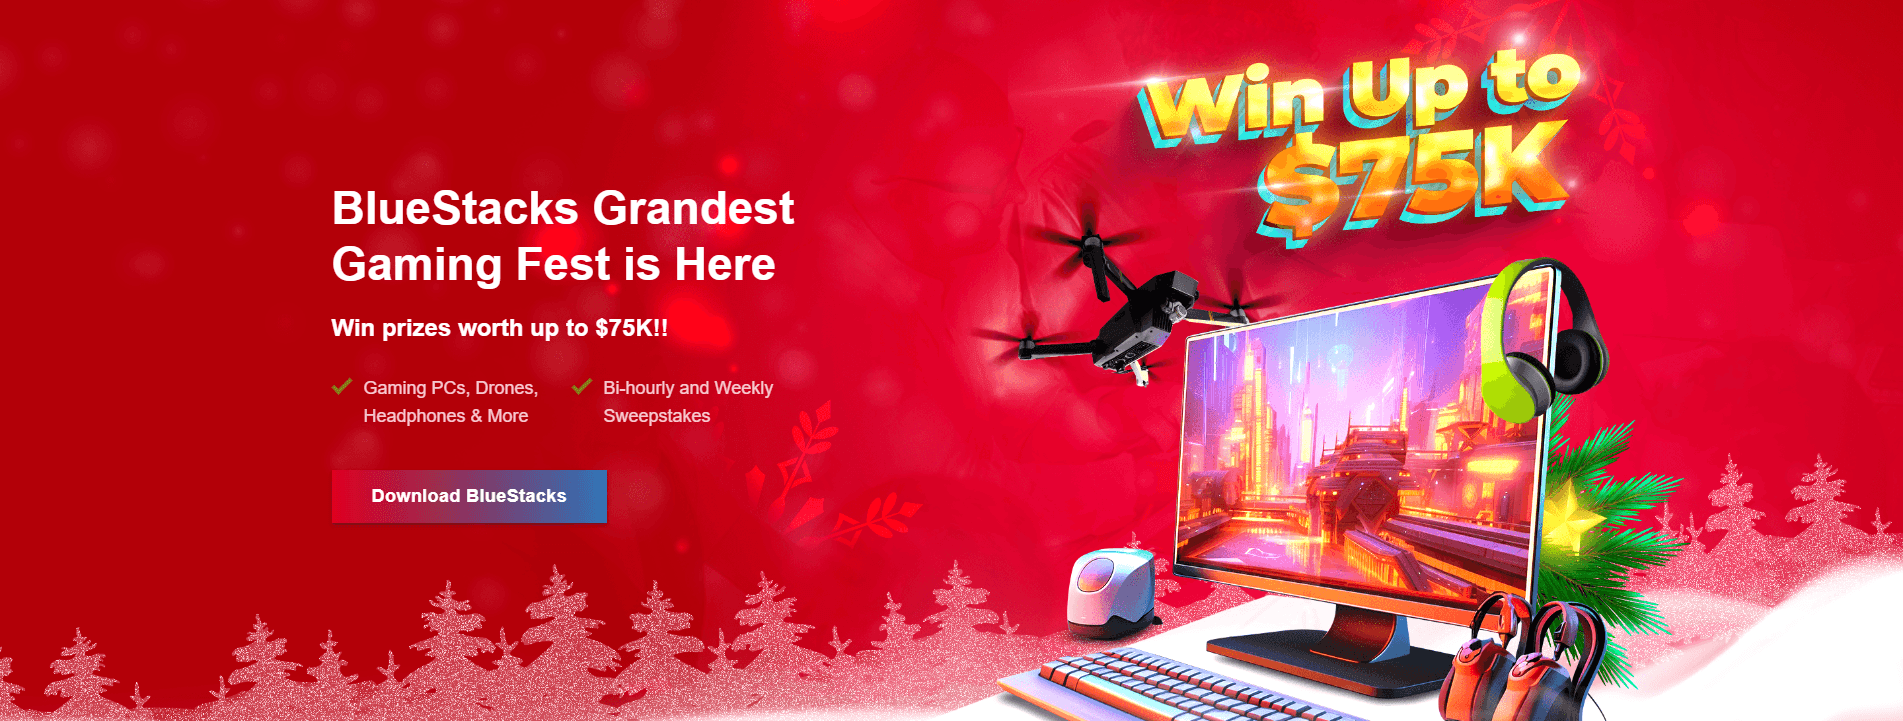 Join the BlueStacks Grandest Gaming Fest to Unwrap Big Wins This Christmas!